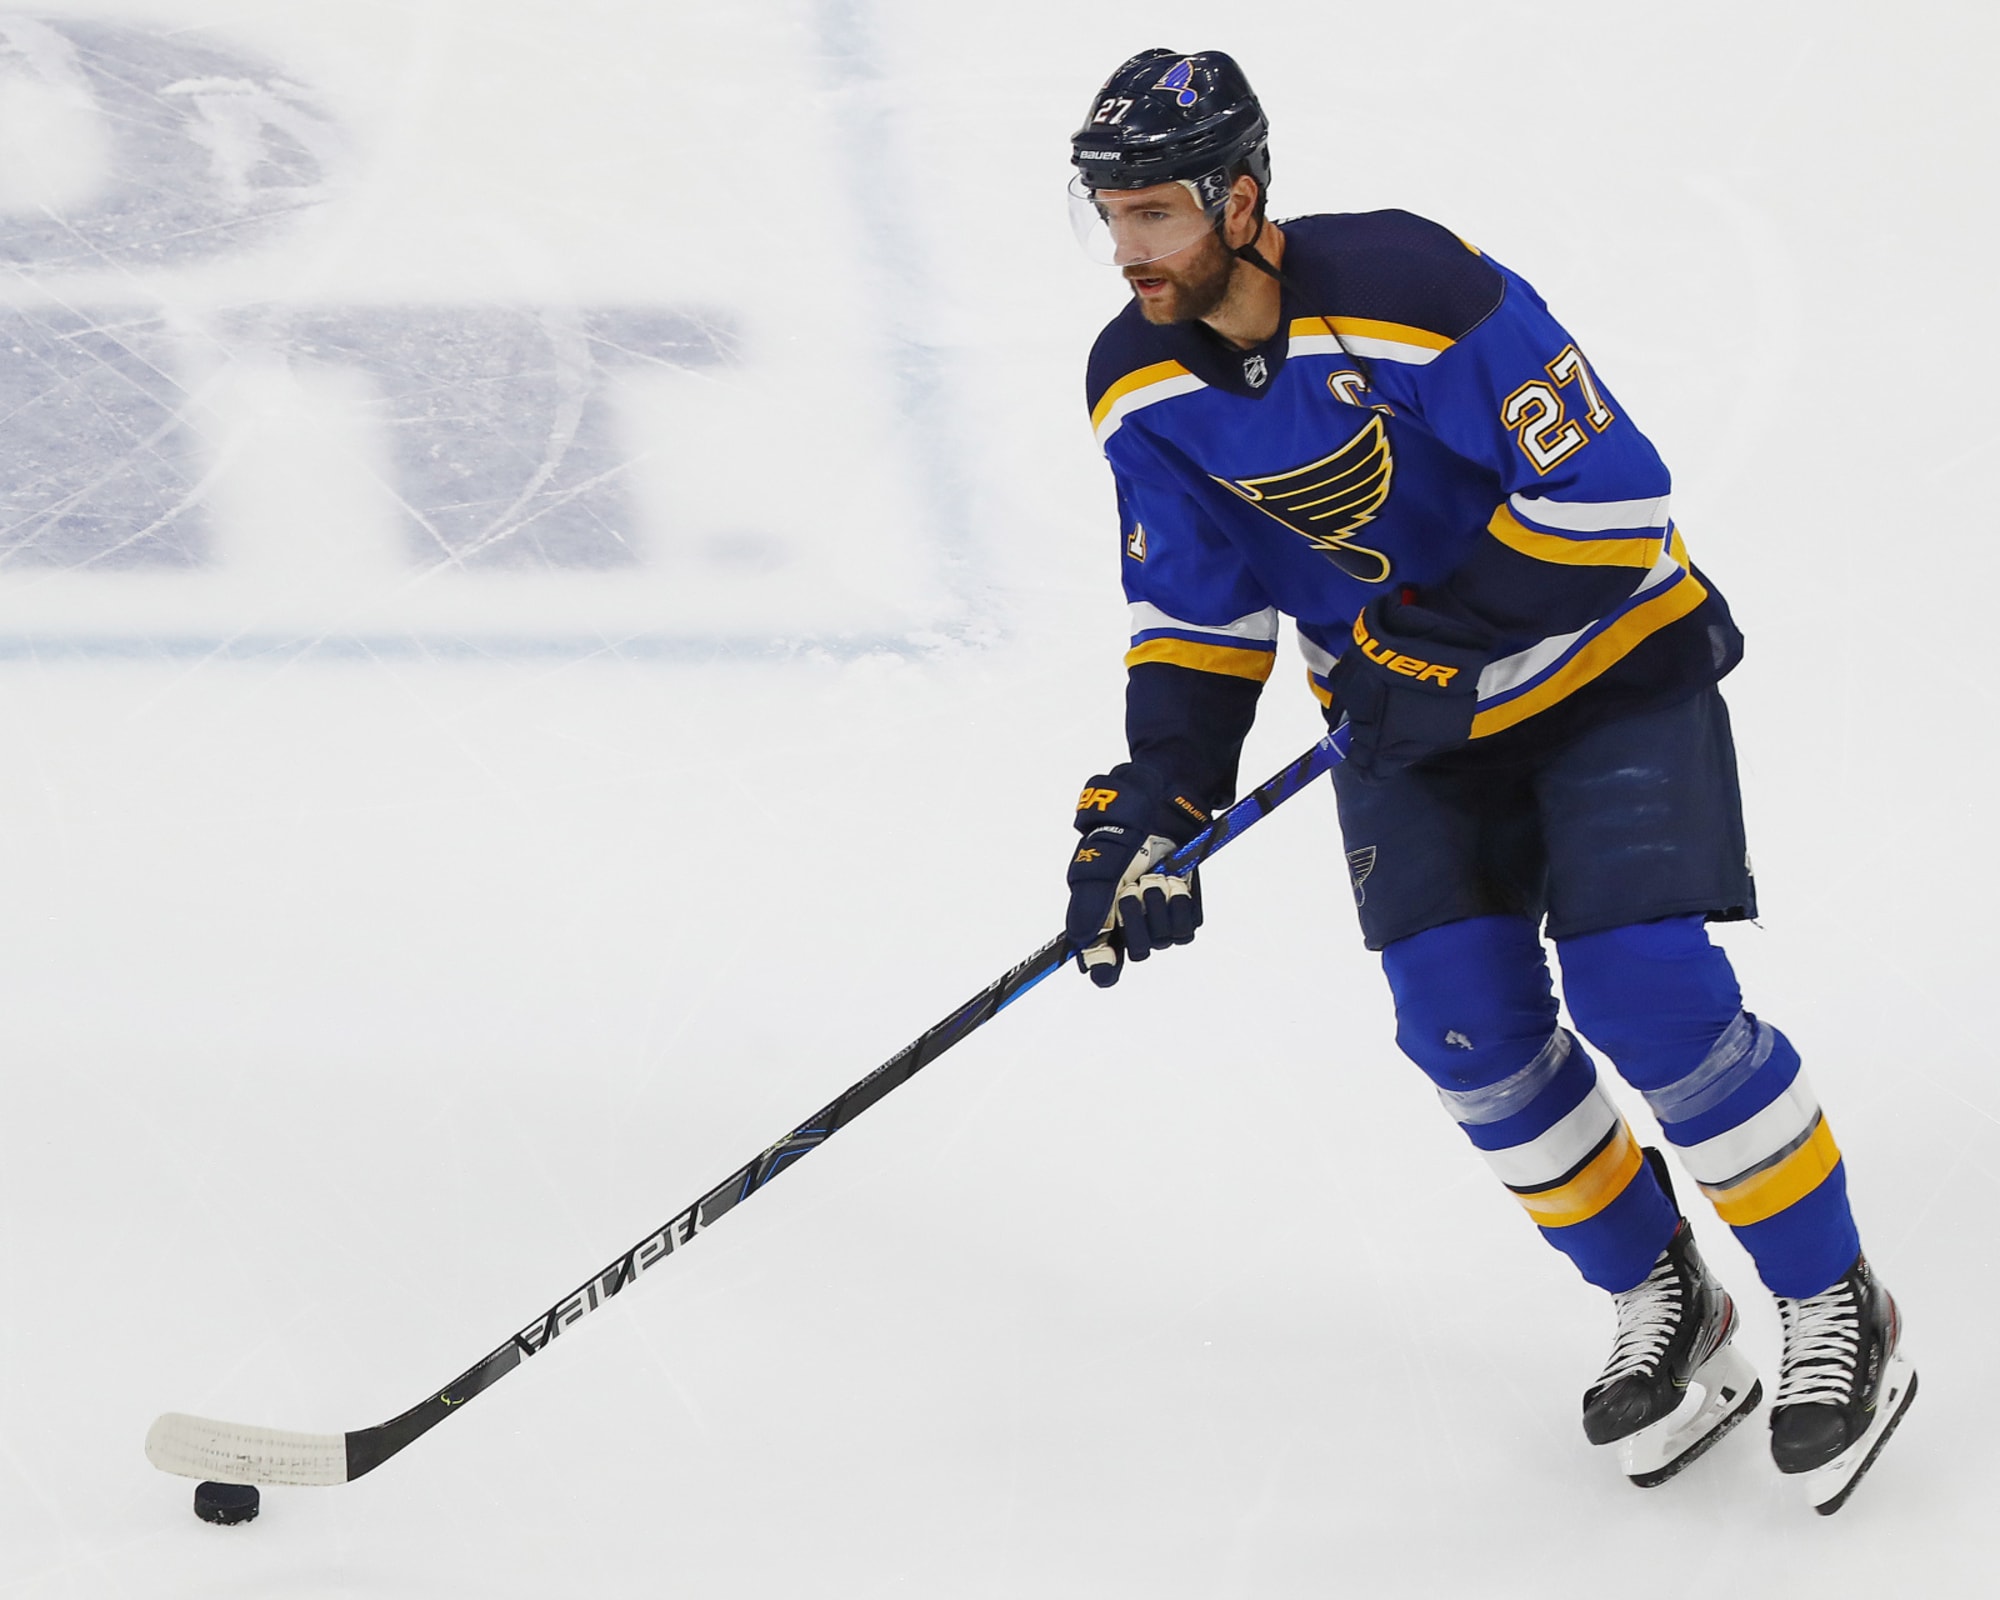 Perron leaves Blues in free agency; Thomas signs big deal